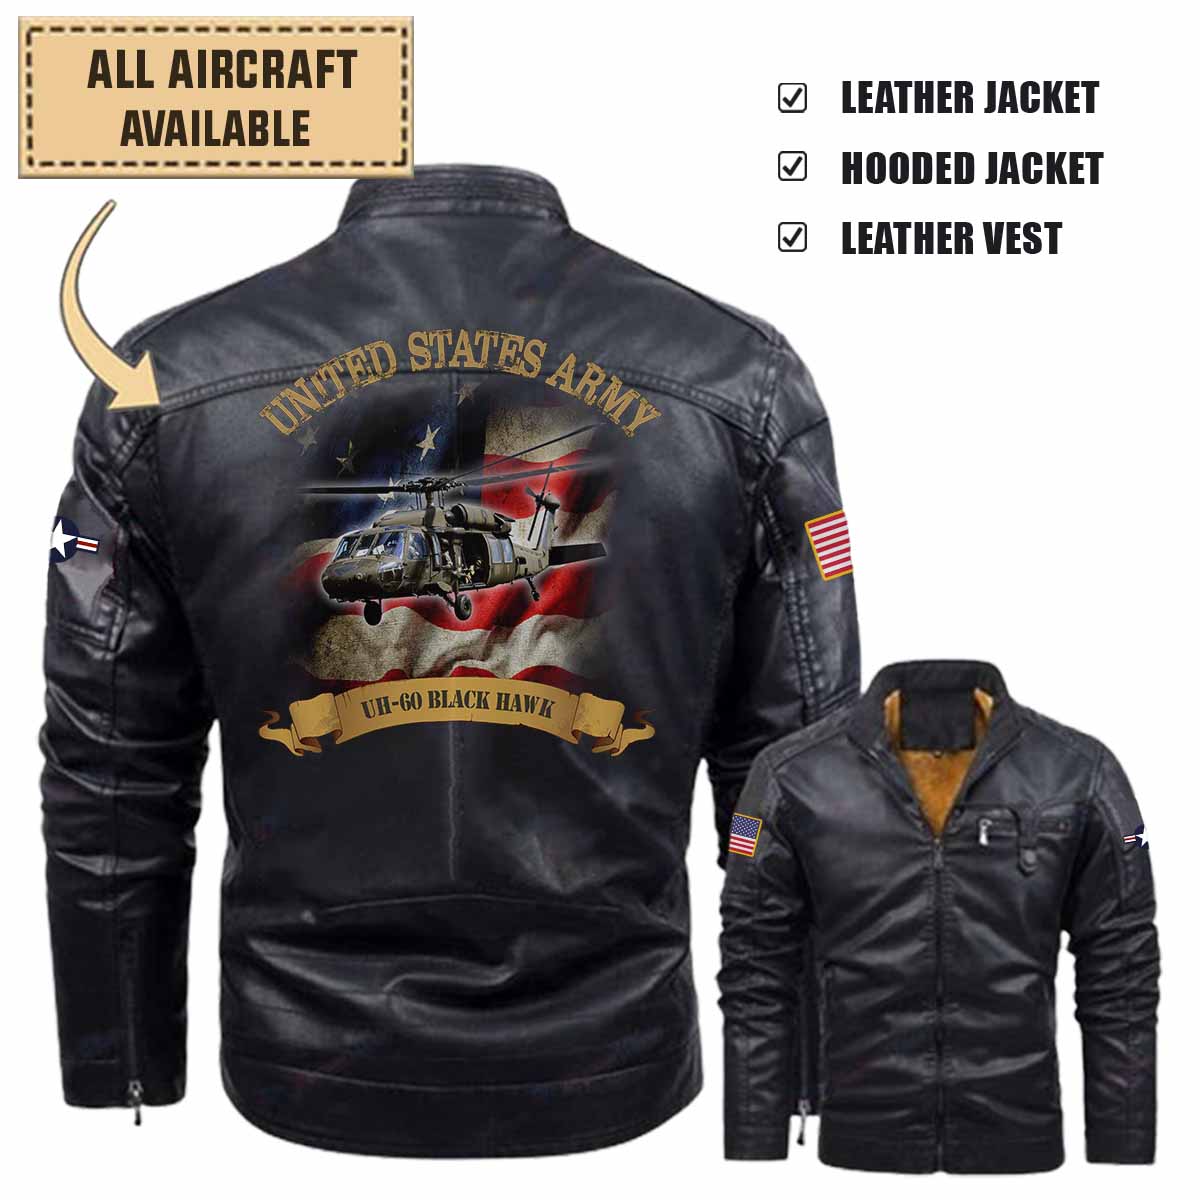 uh 60 black hawk uh60 armyaircraft leather jacket and vest mmt9c